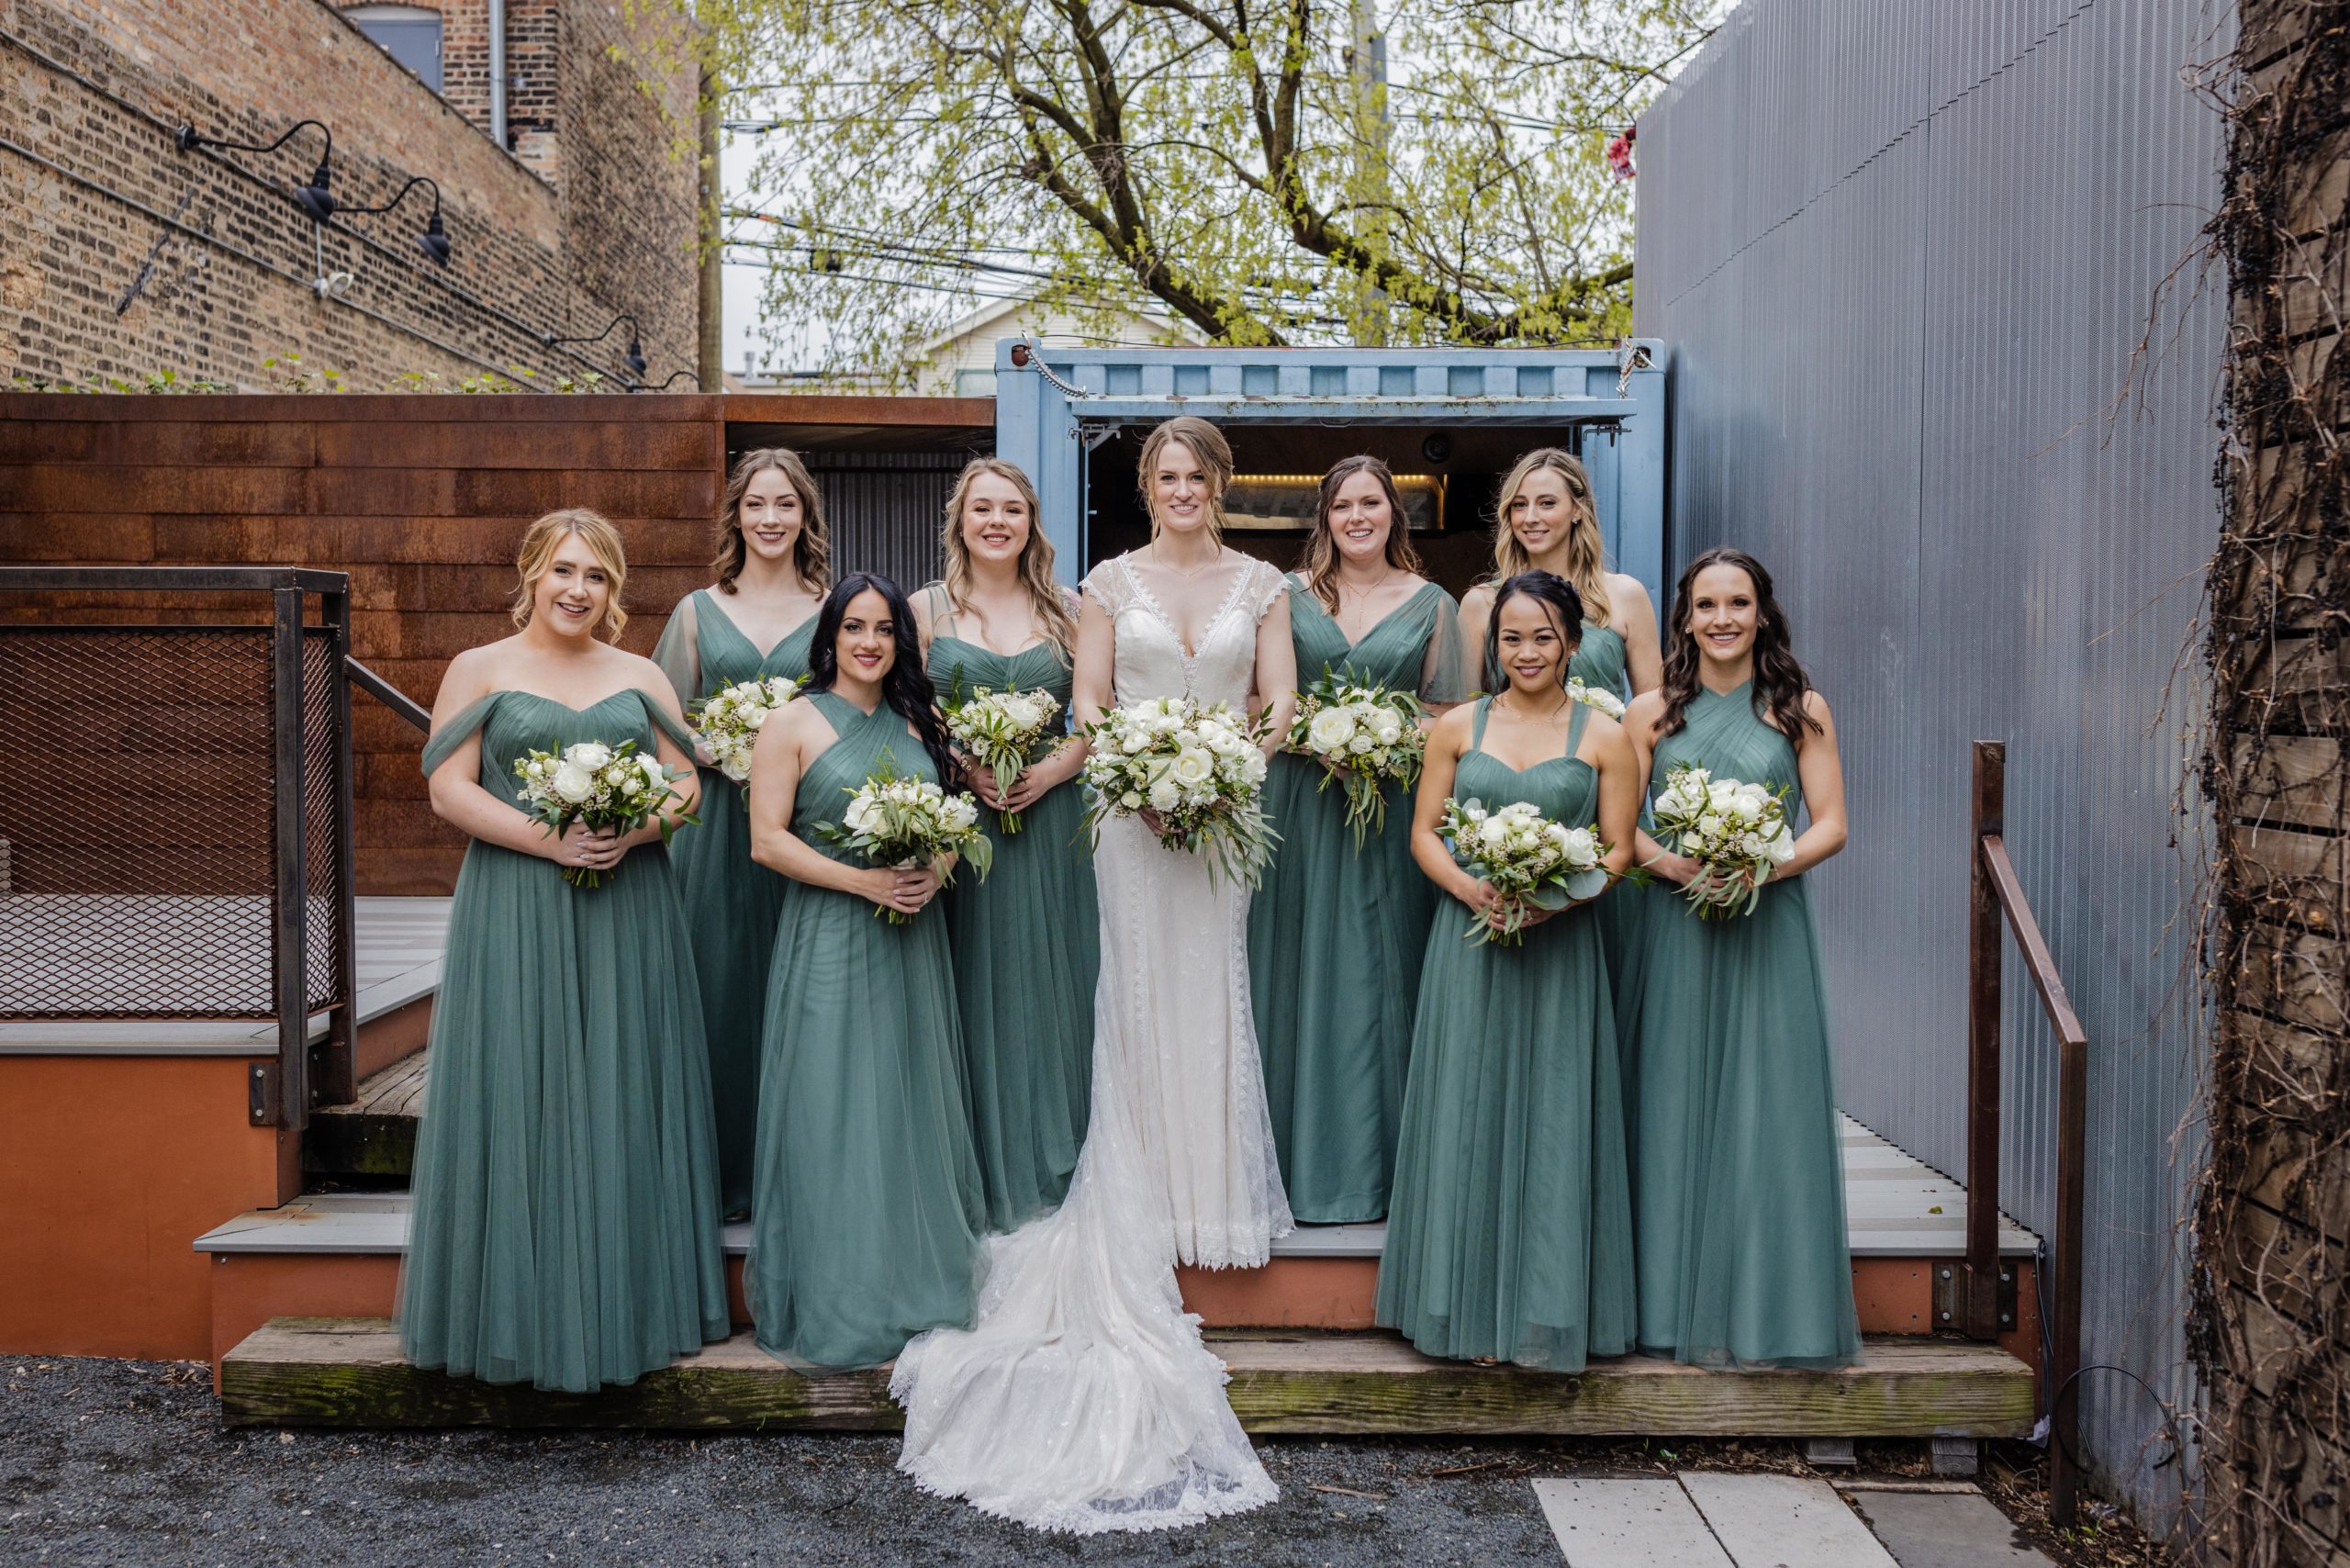 Bridesmaids posing together at the joinery